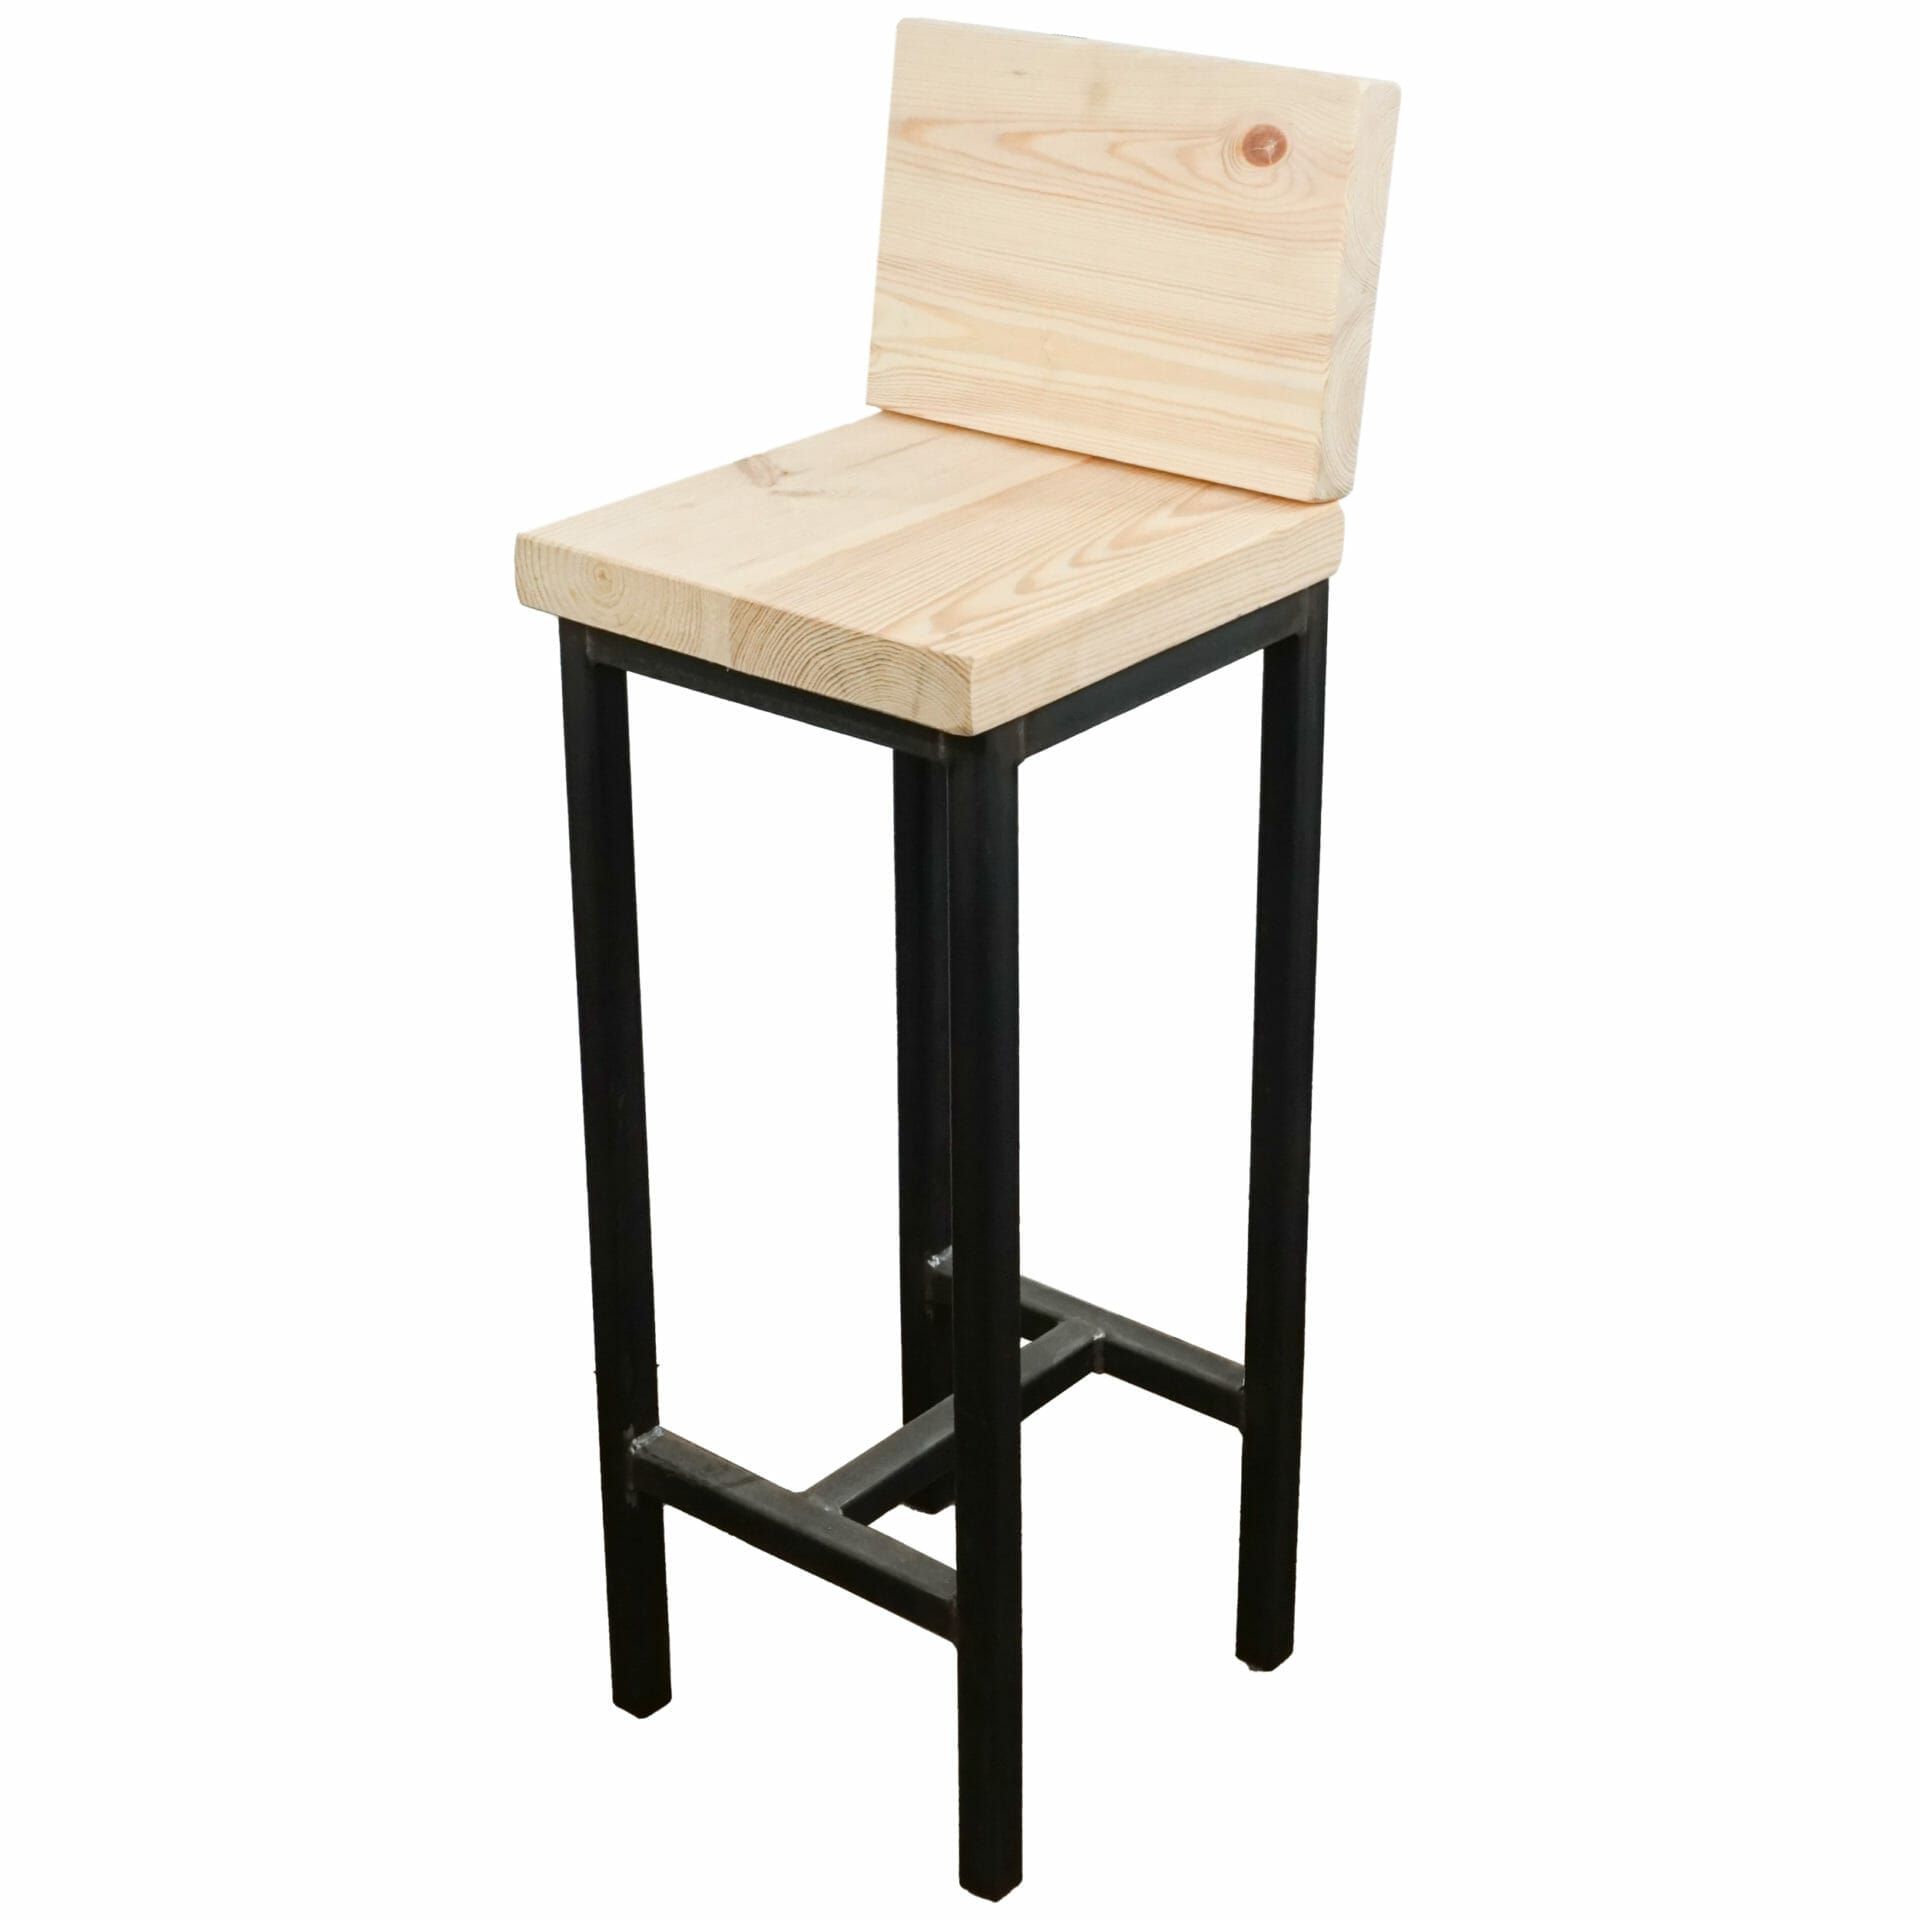 high bar stool with steel black legs and reclaimed wooden seat and back